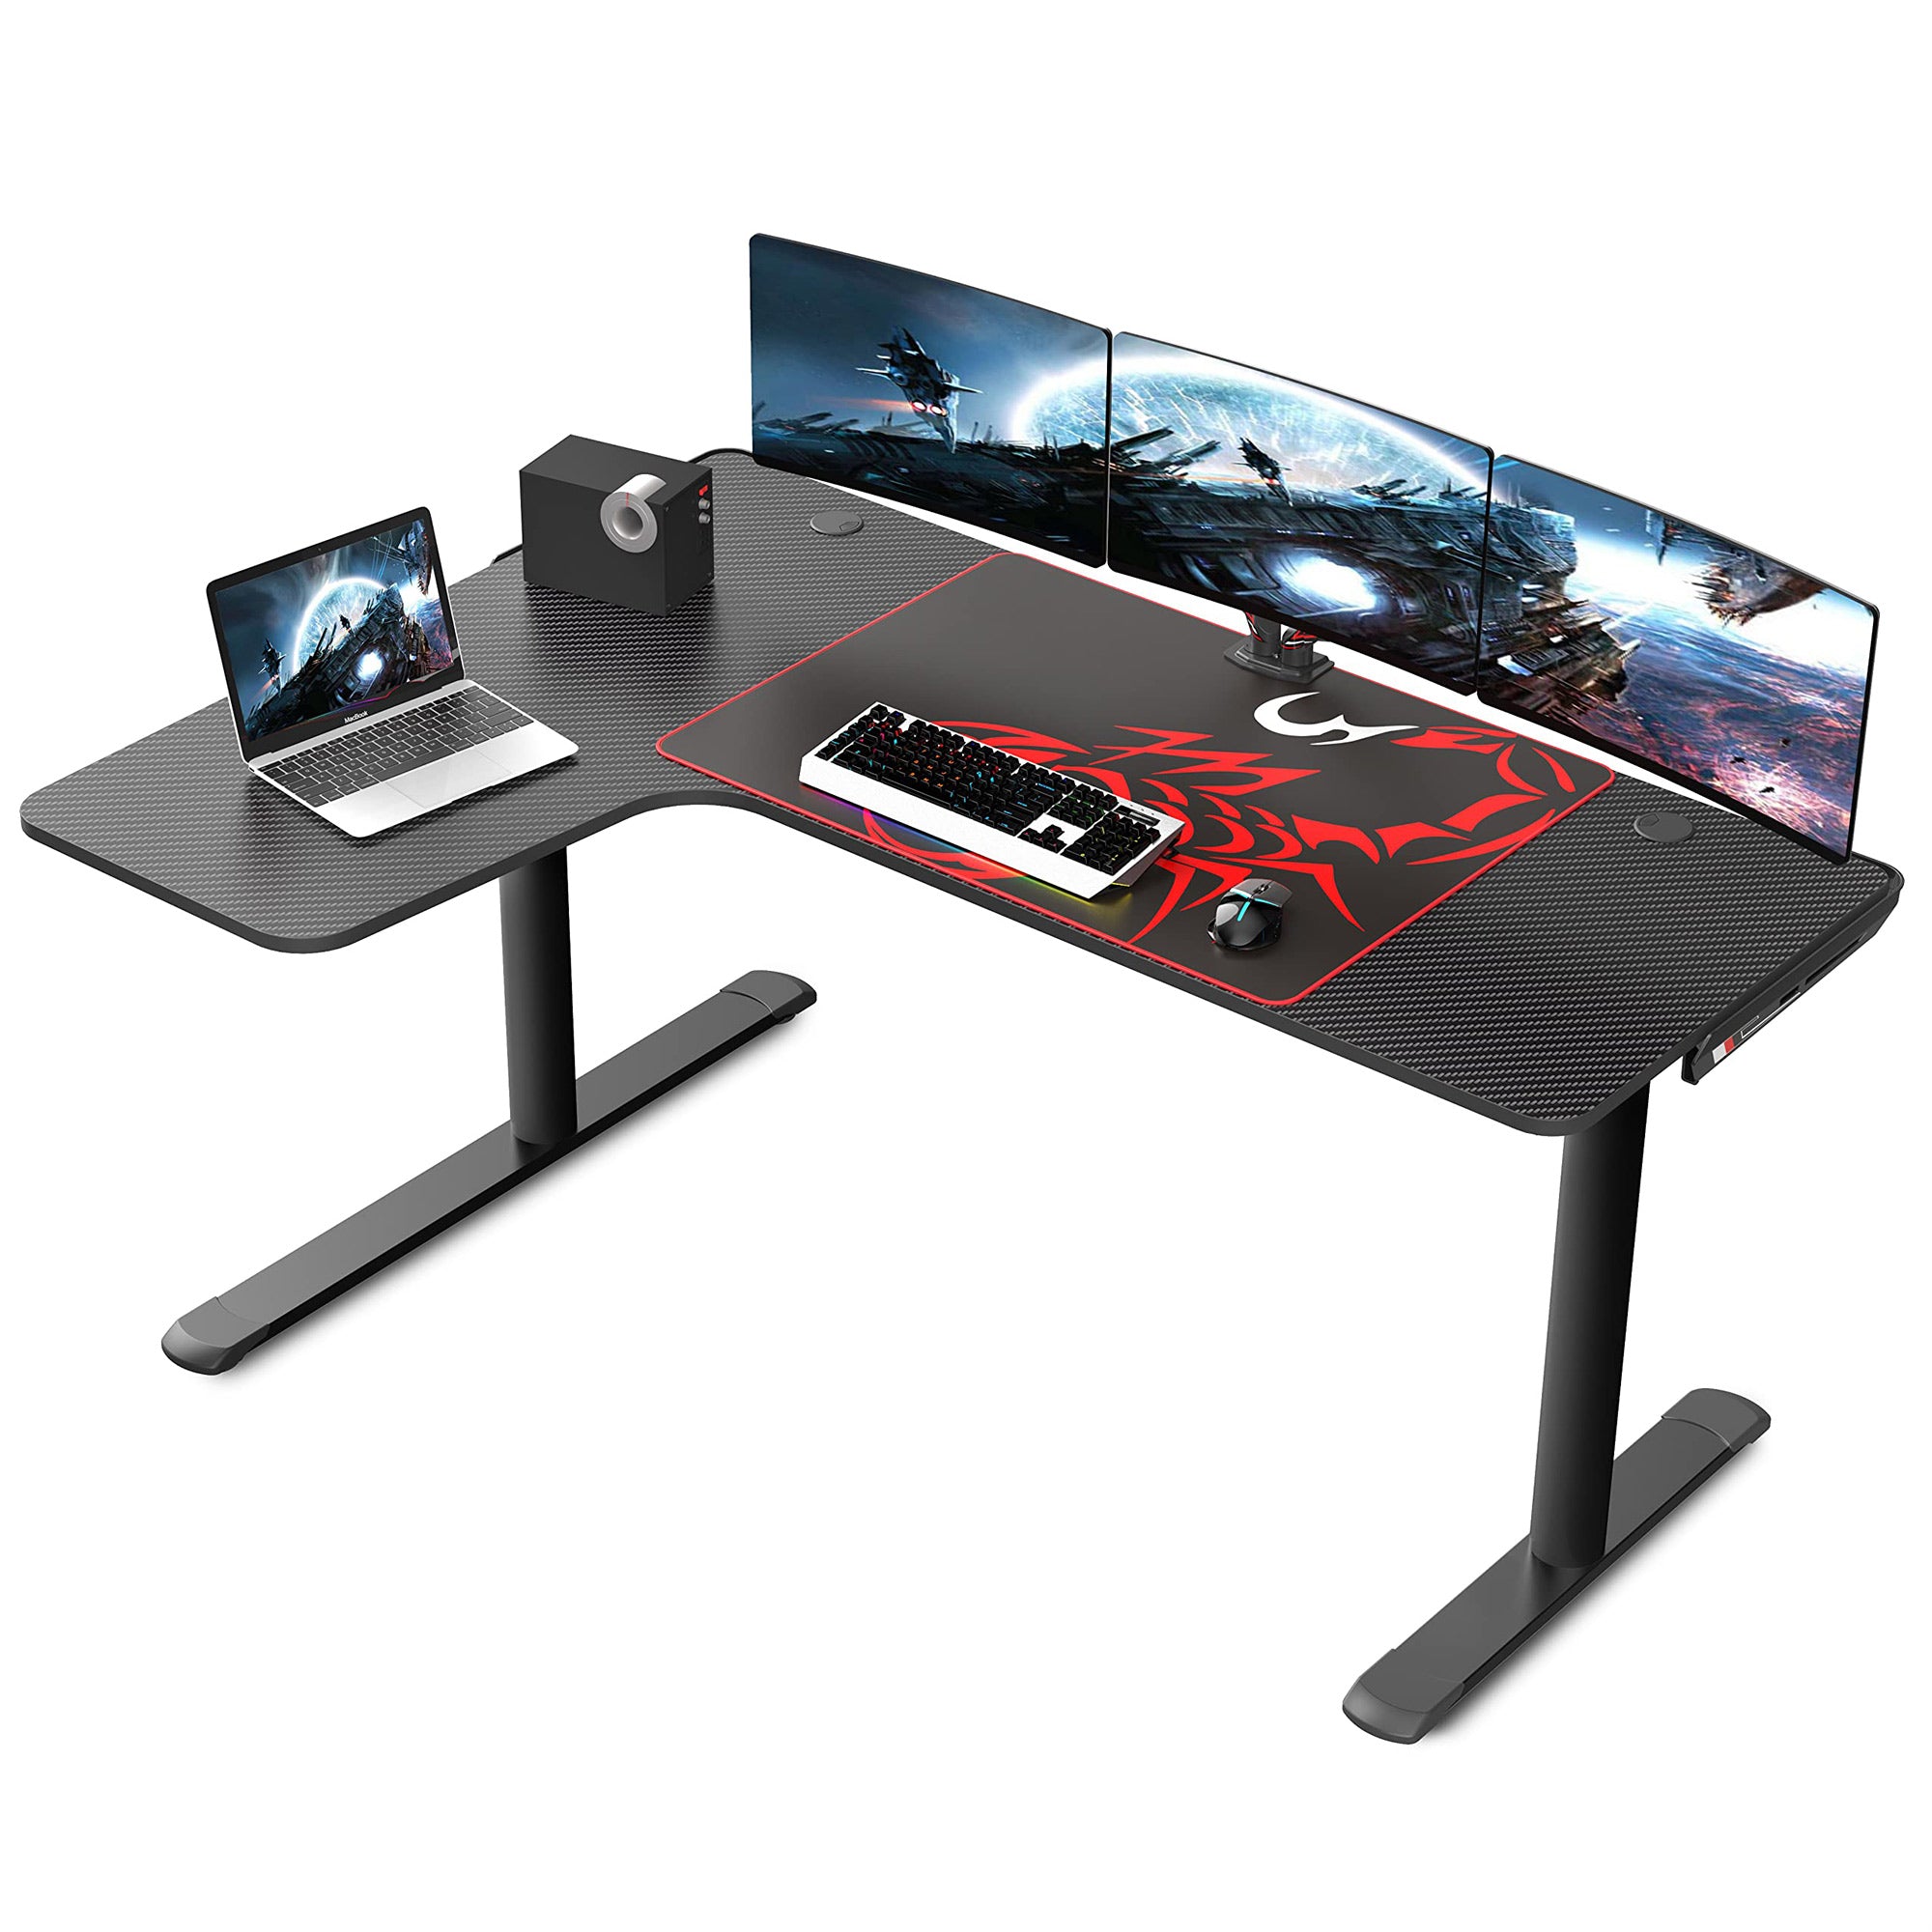 Eureka 60'' L shaped Computer Desk with Mouse Pad and Cable Management